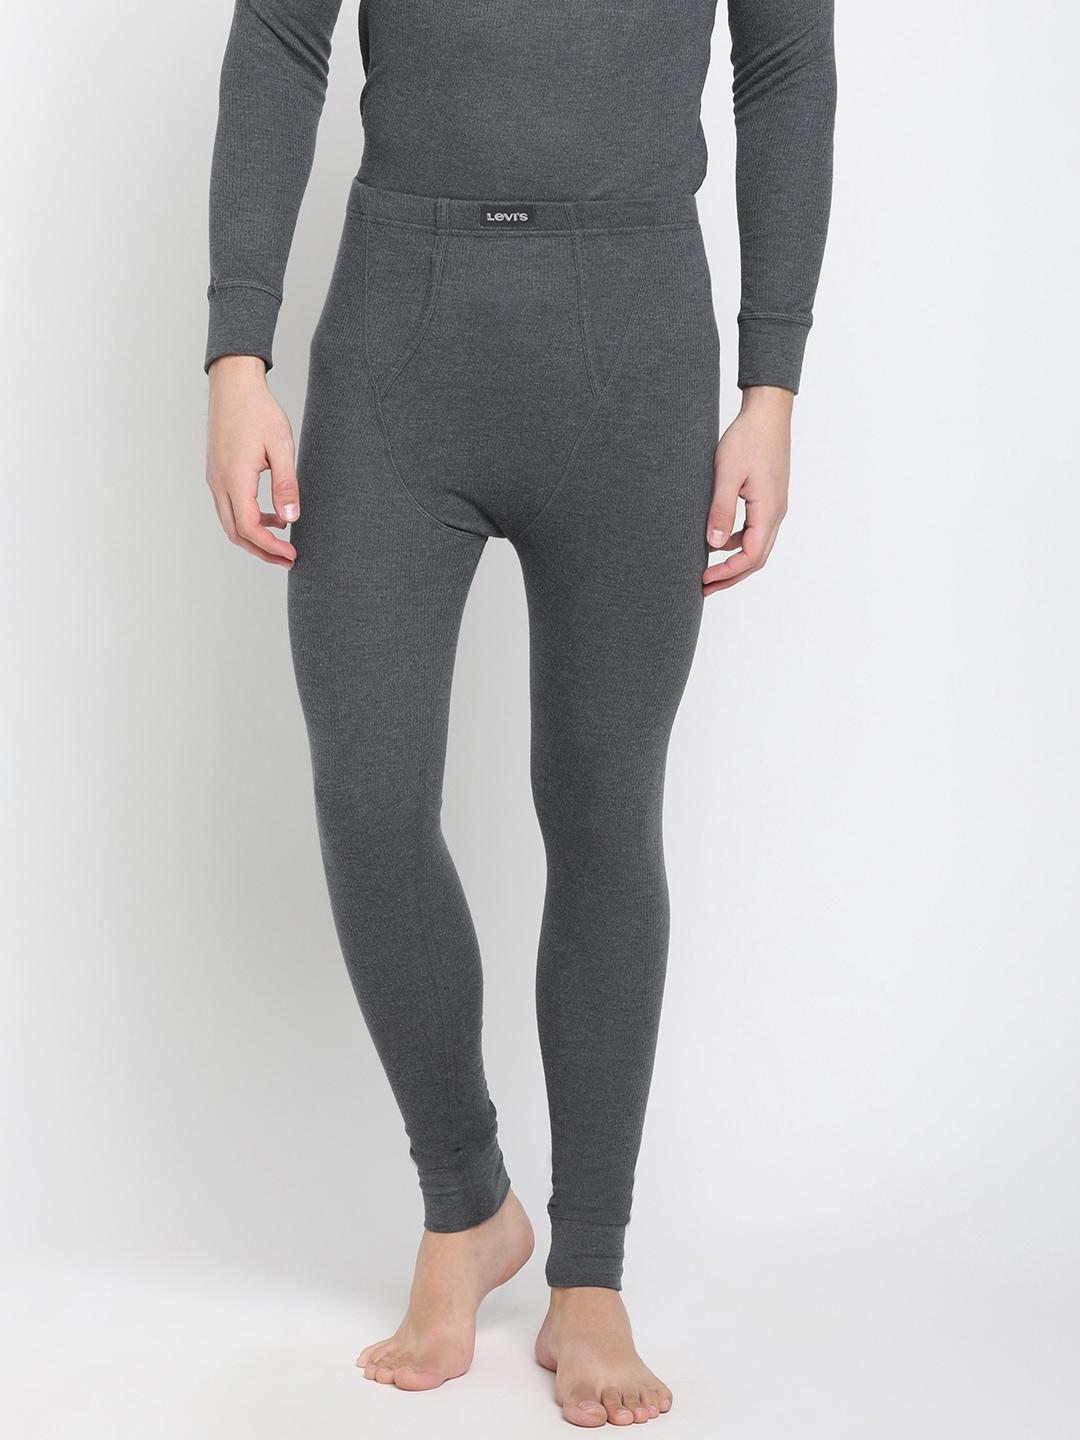 levis-men-charcoal-grey-solid--thermal-bottoms